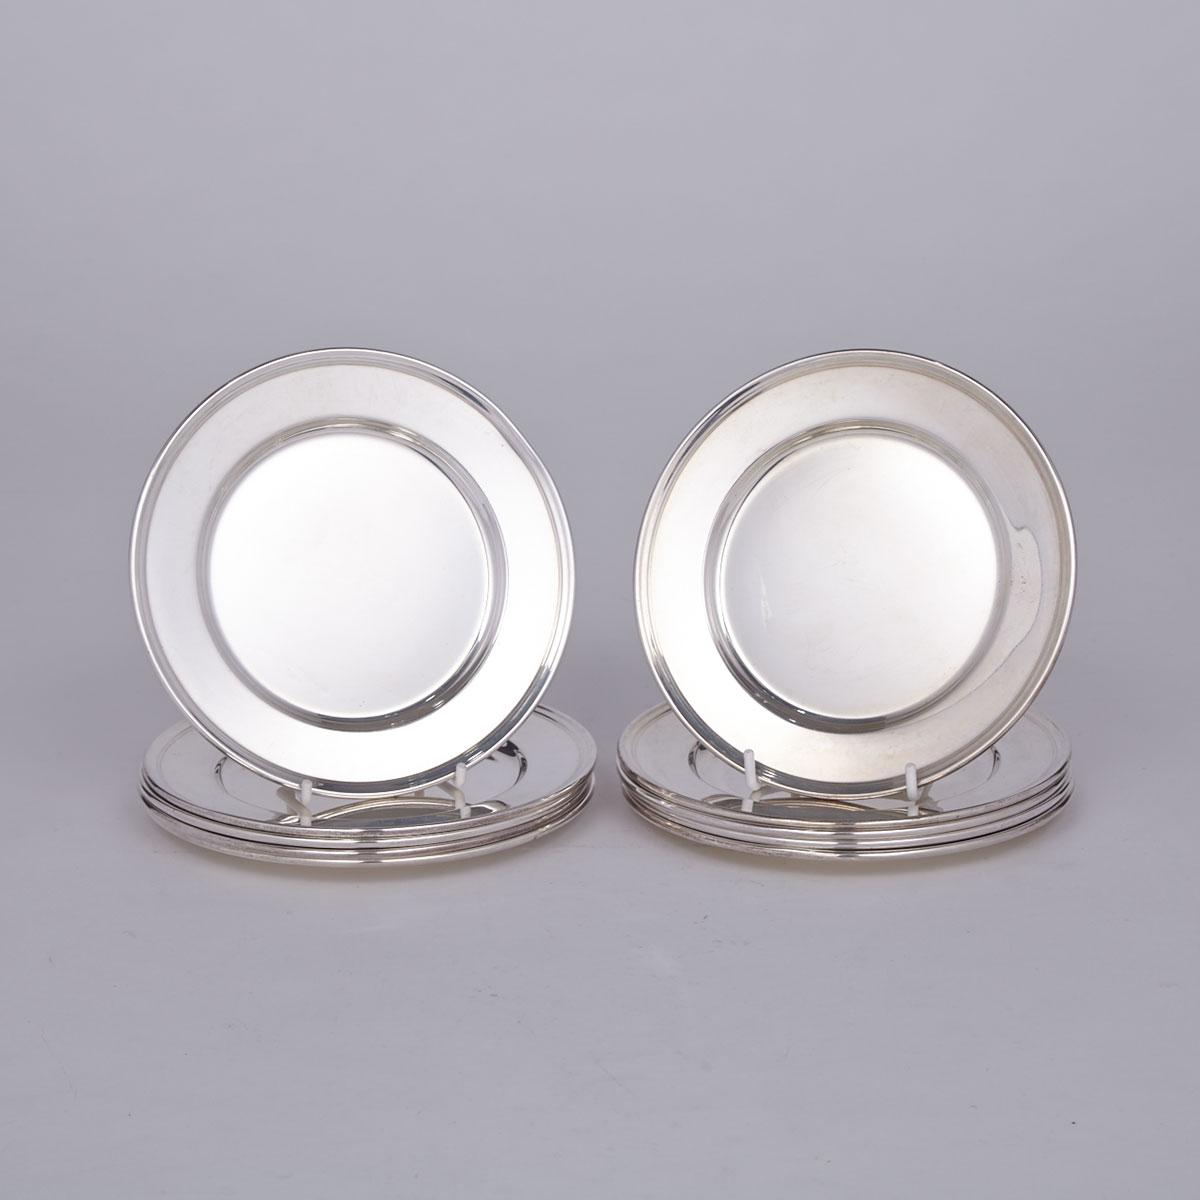 Ten American Silver Side Plates, Wallace Silversmiths, Wallingford, Ct., 20th century